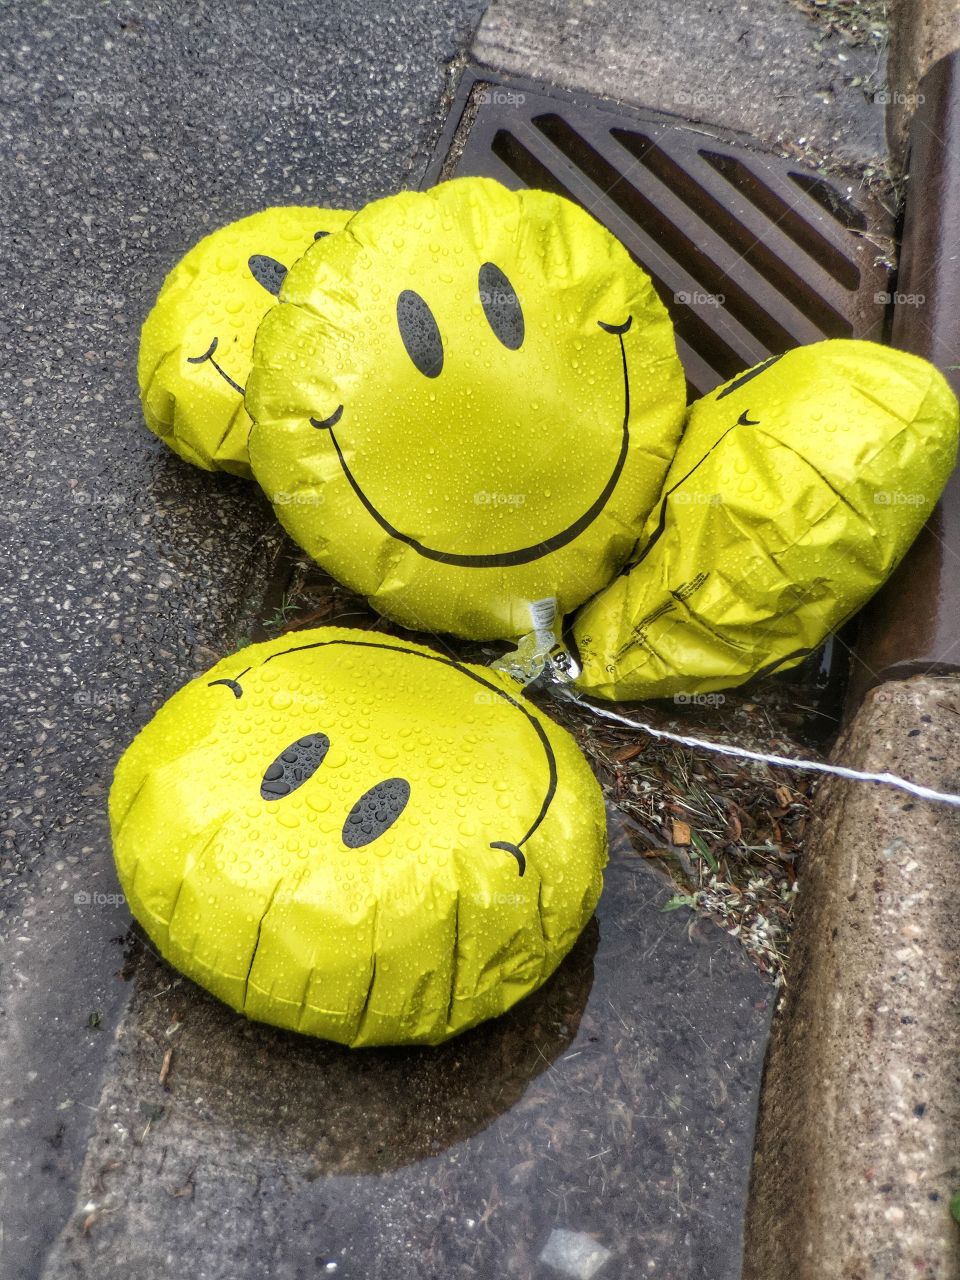 Smiley Faces in a Sad State